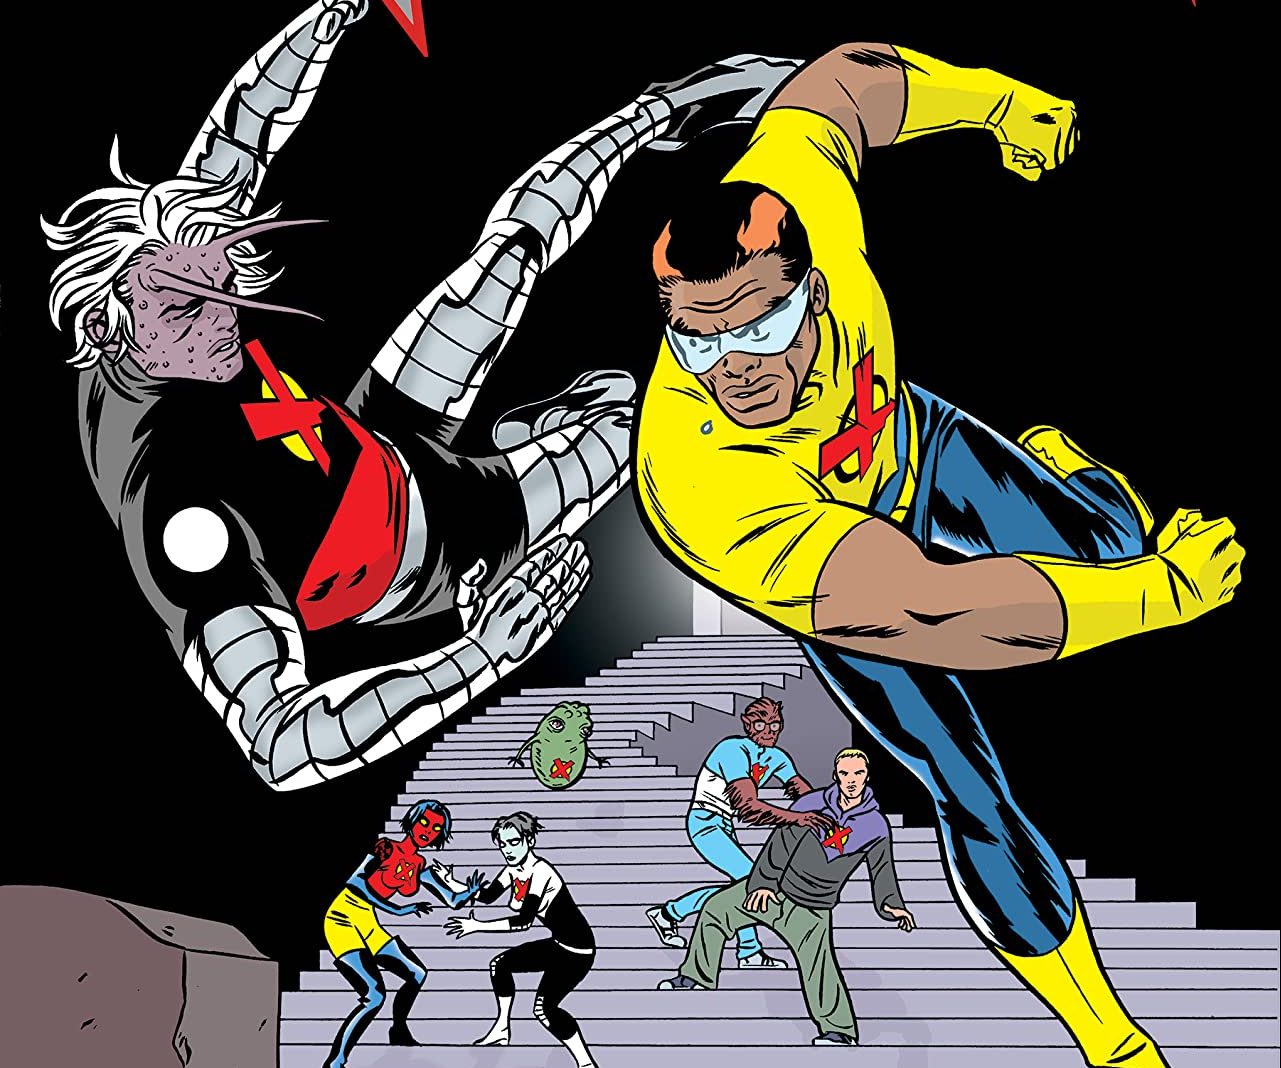 X-Statix: The Complete Collection Vol. 2